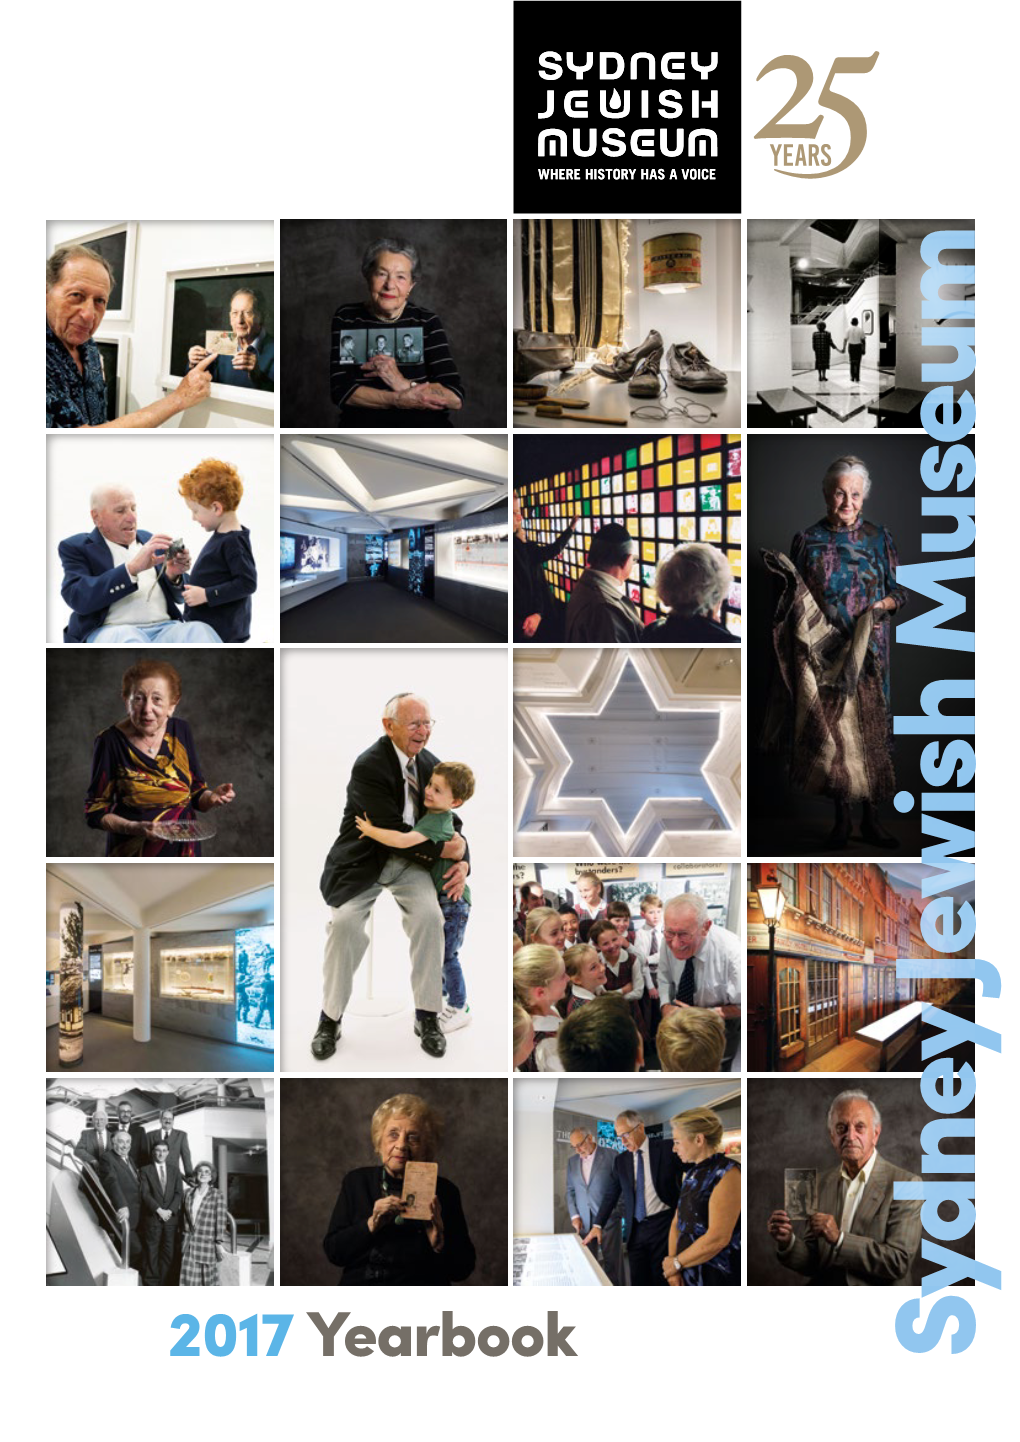 2017 Yearbook DL53160 Congratulations to the Sydney Jewish Museum on 25 Years of Vital Work in the Community